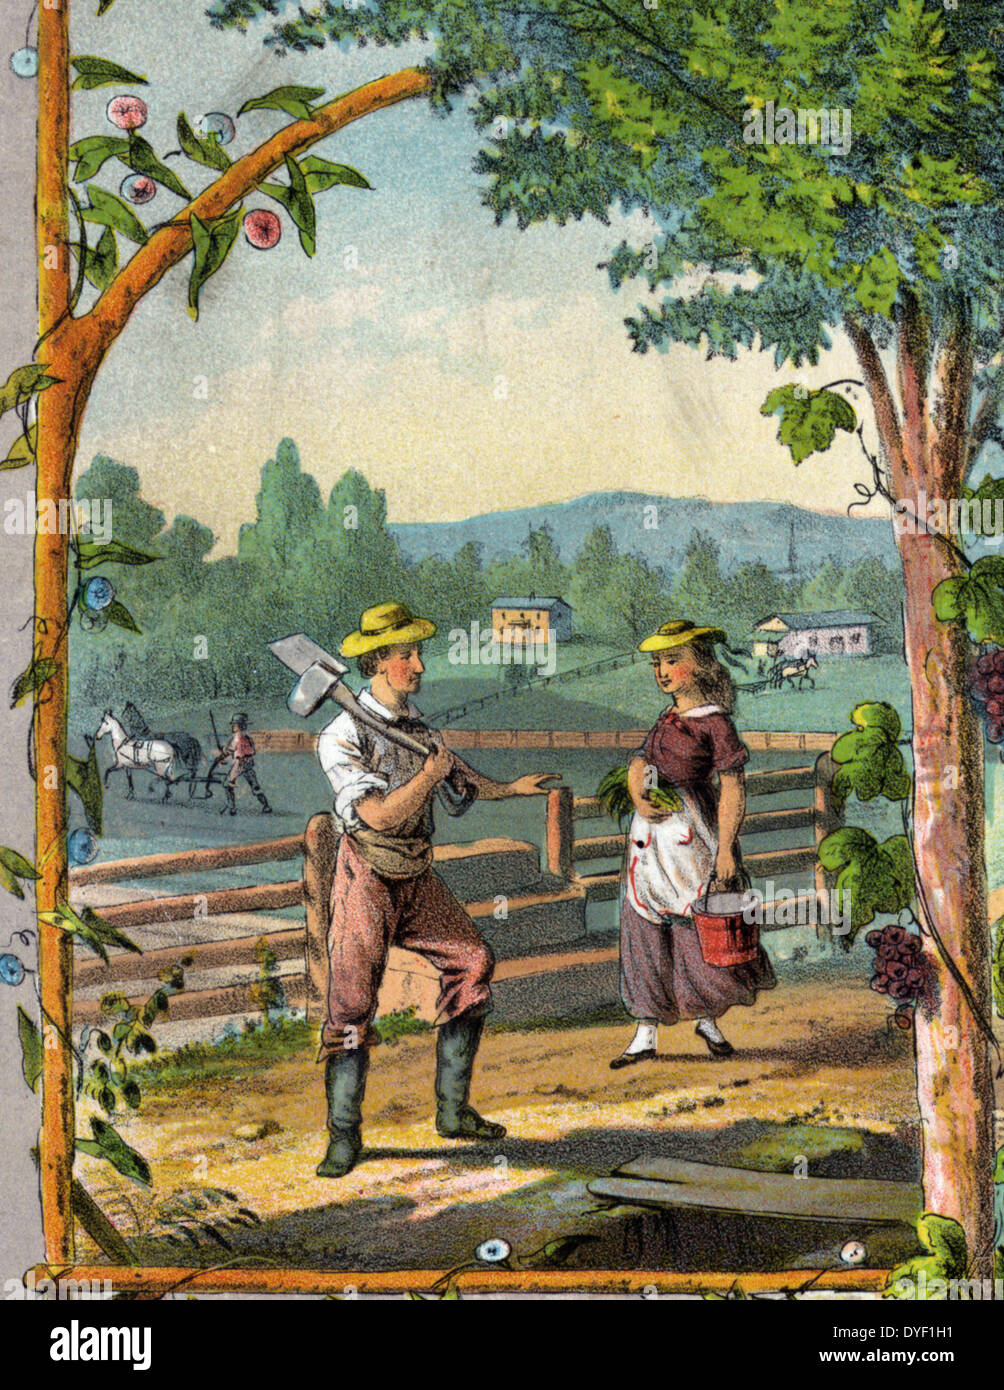 Gift for the grangers c1873. chromolithograph. Promotional print for Grange members showing scenes of farming and farm life. Stock Photo